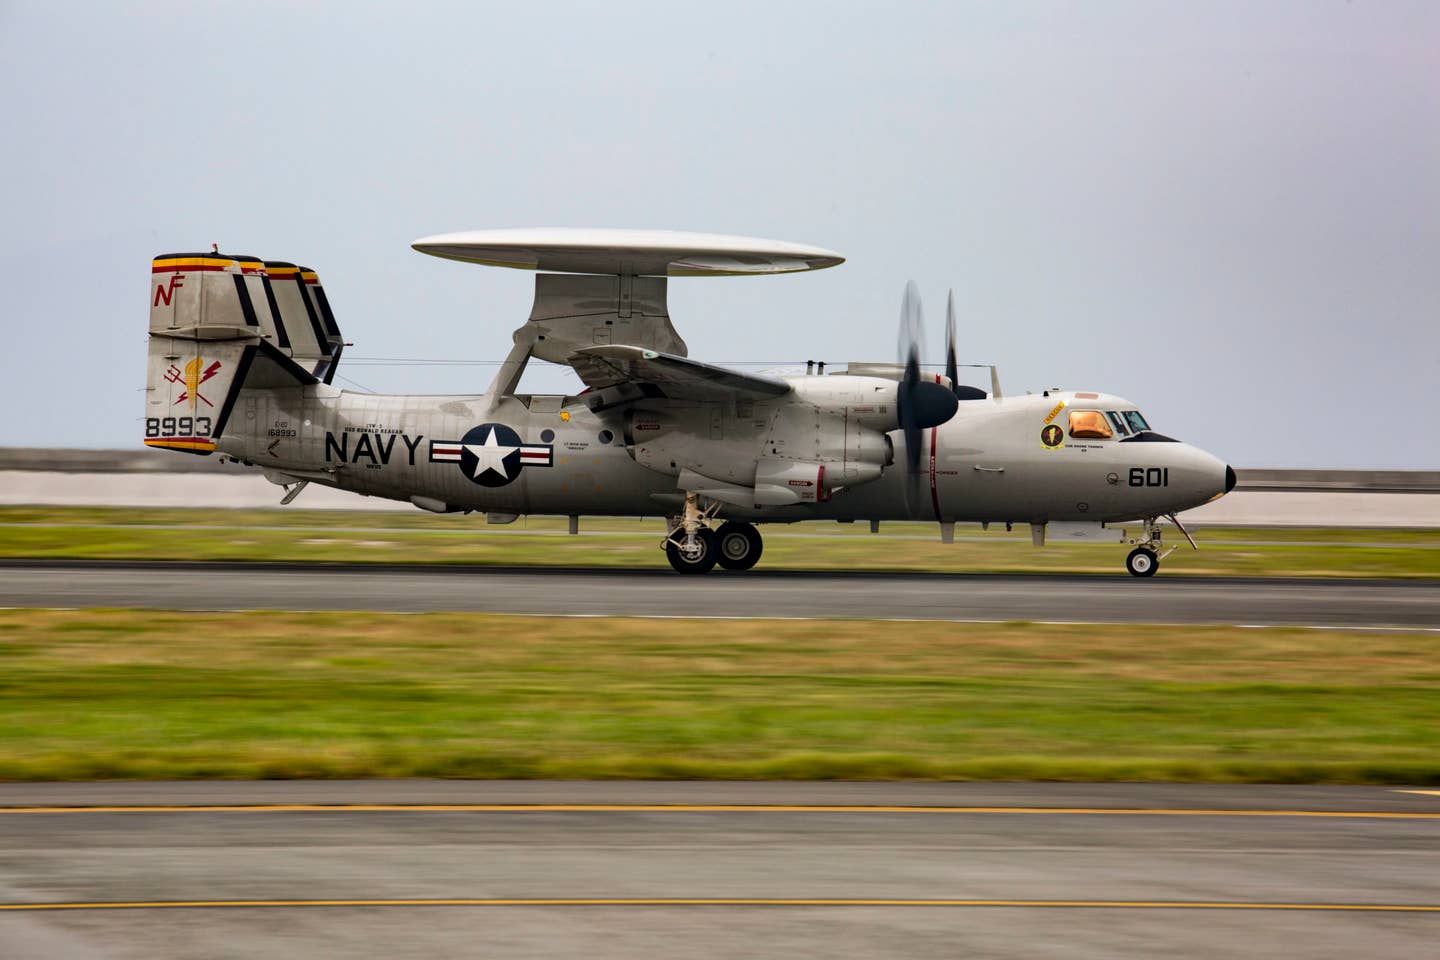 The E-2D Advanced Hawkeye is the latest variant of the long-running E-2 Hawkeye series of aircraft, which employs long-range radar and electronic communications capabilities to oversee the battlespace and detect threats beyond the sensor range of other friendly units. (U.S. Marine Corps photo by Lance Cpl. Jacob A. Farbo)